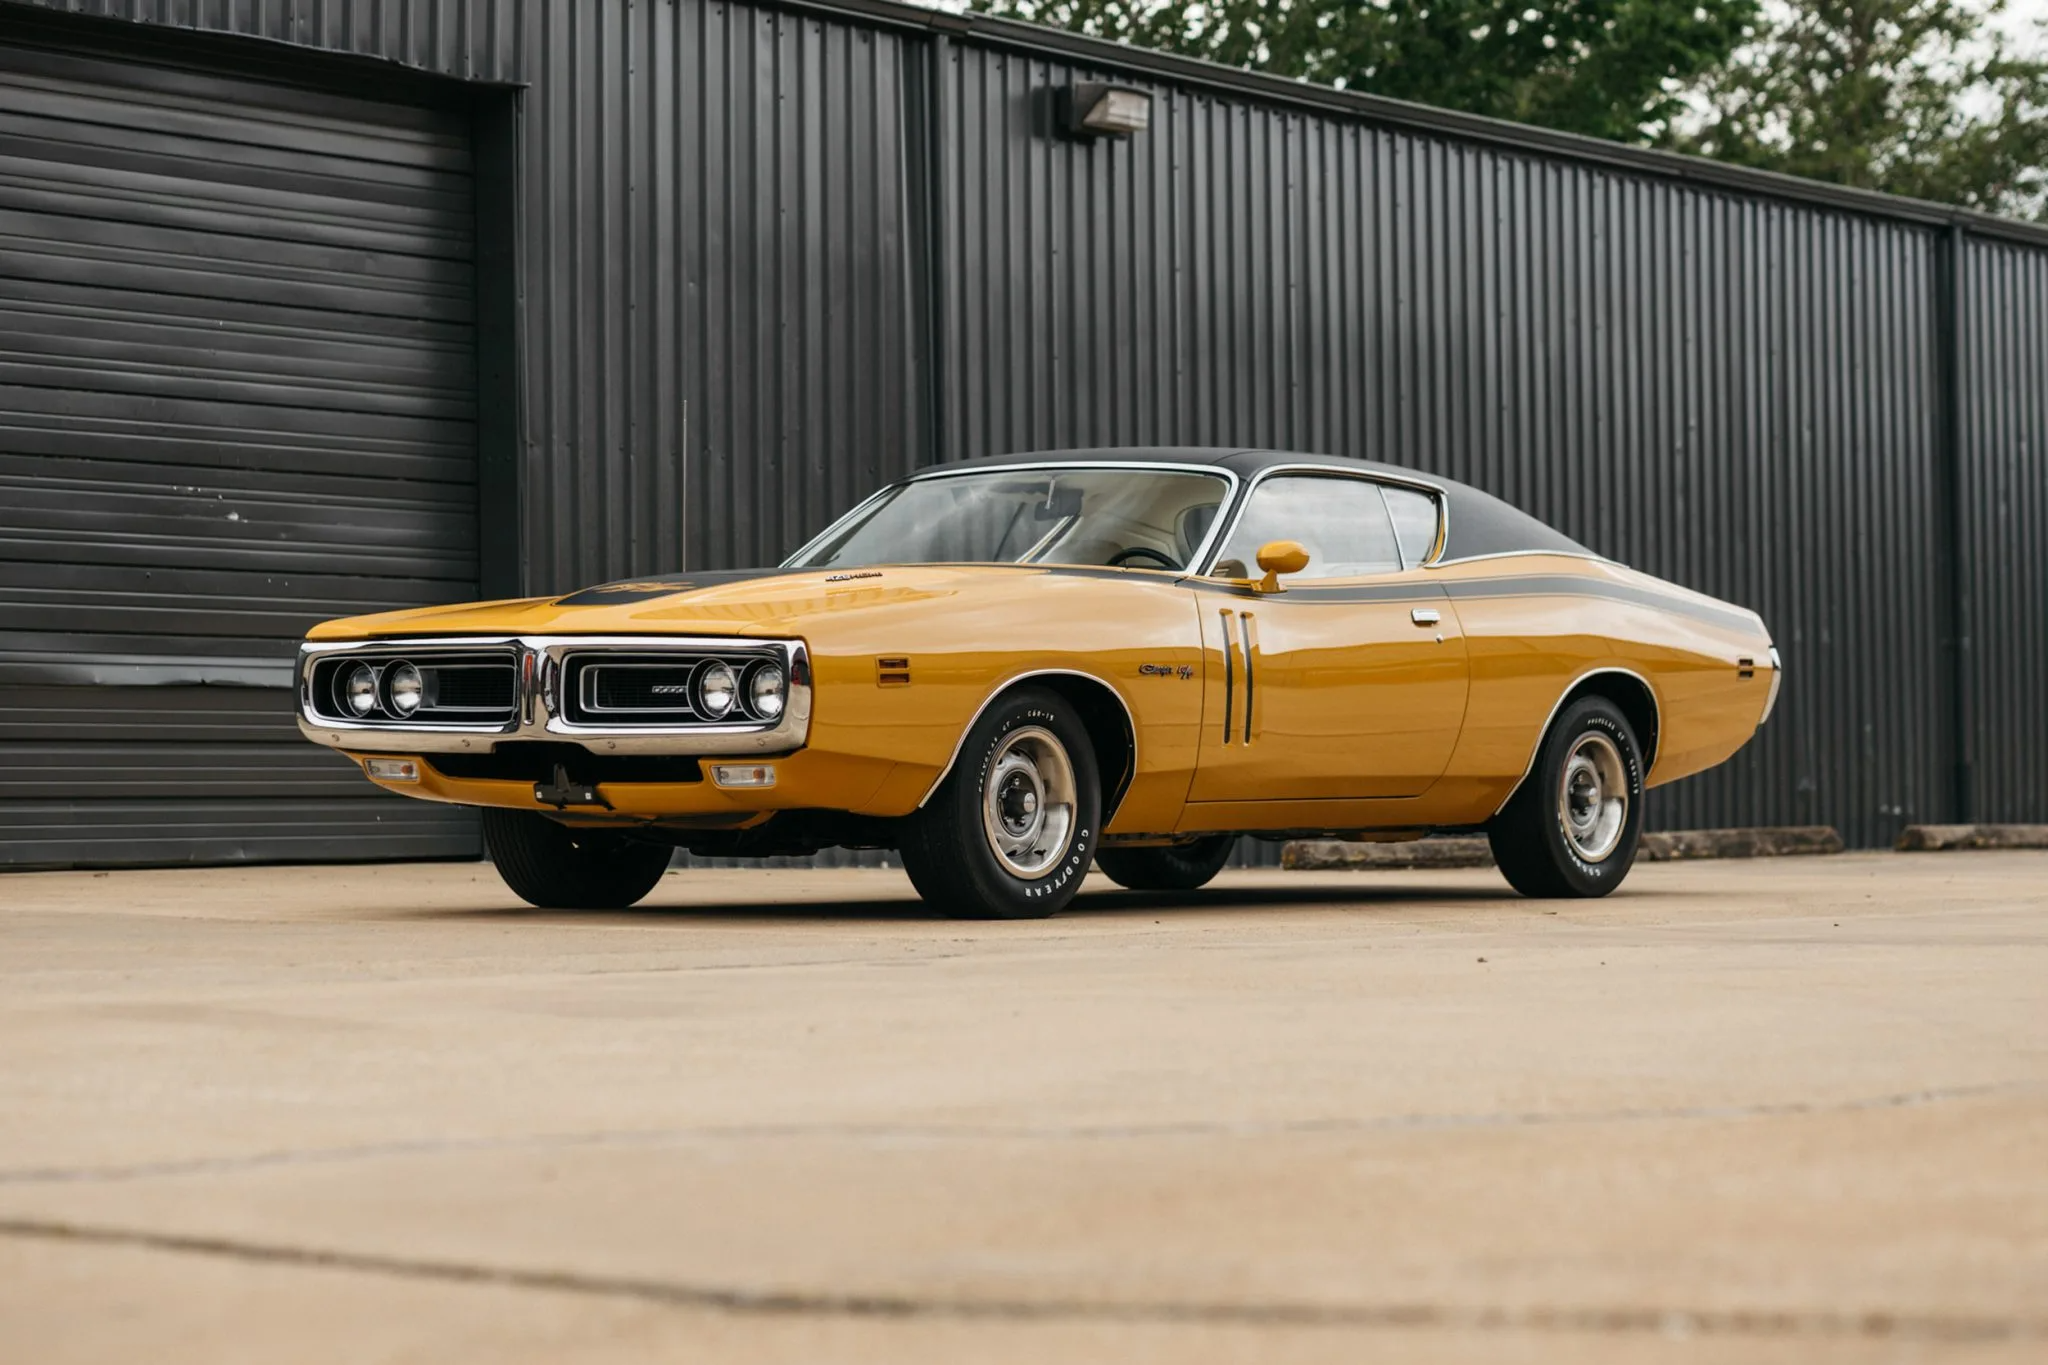 7 liter V8 Hemi and perfect condition in a car over 50 years old.  Rare 1971 Dodge Charger up for auction